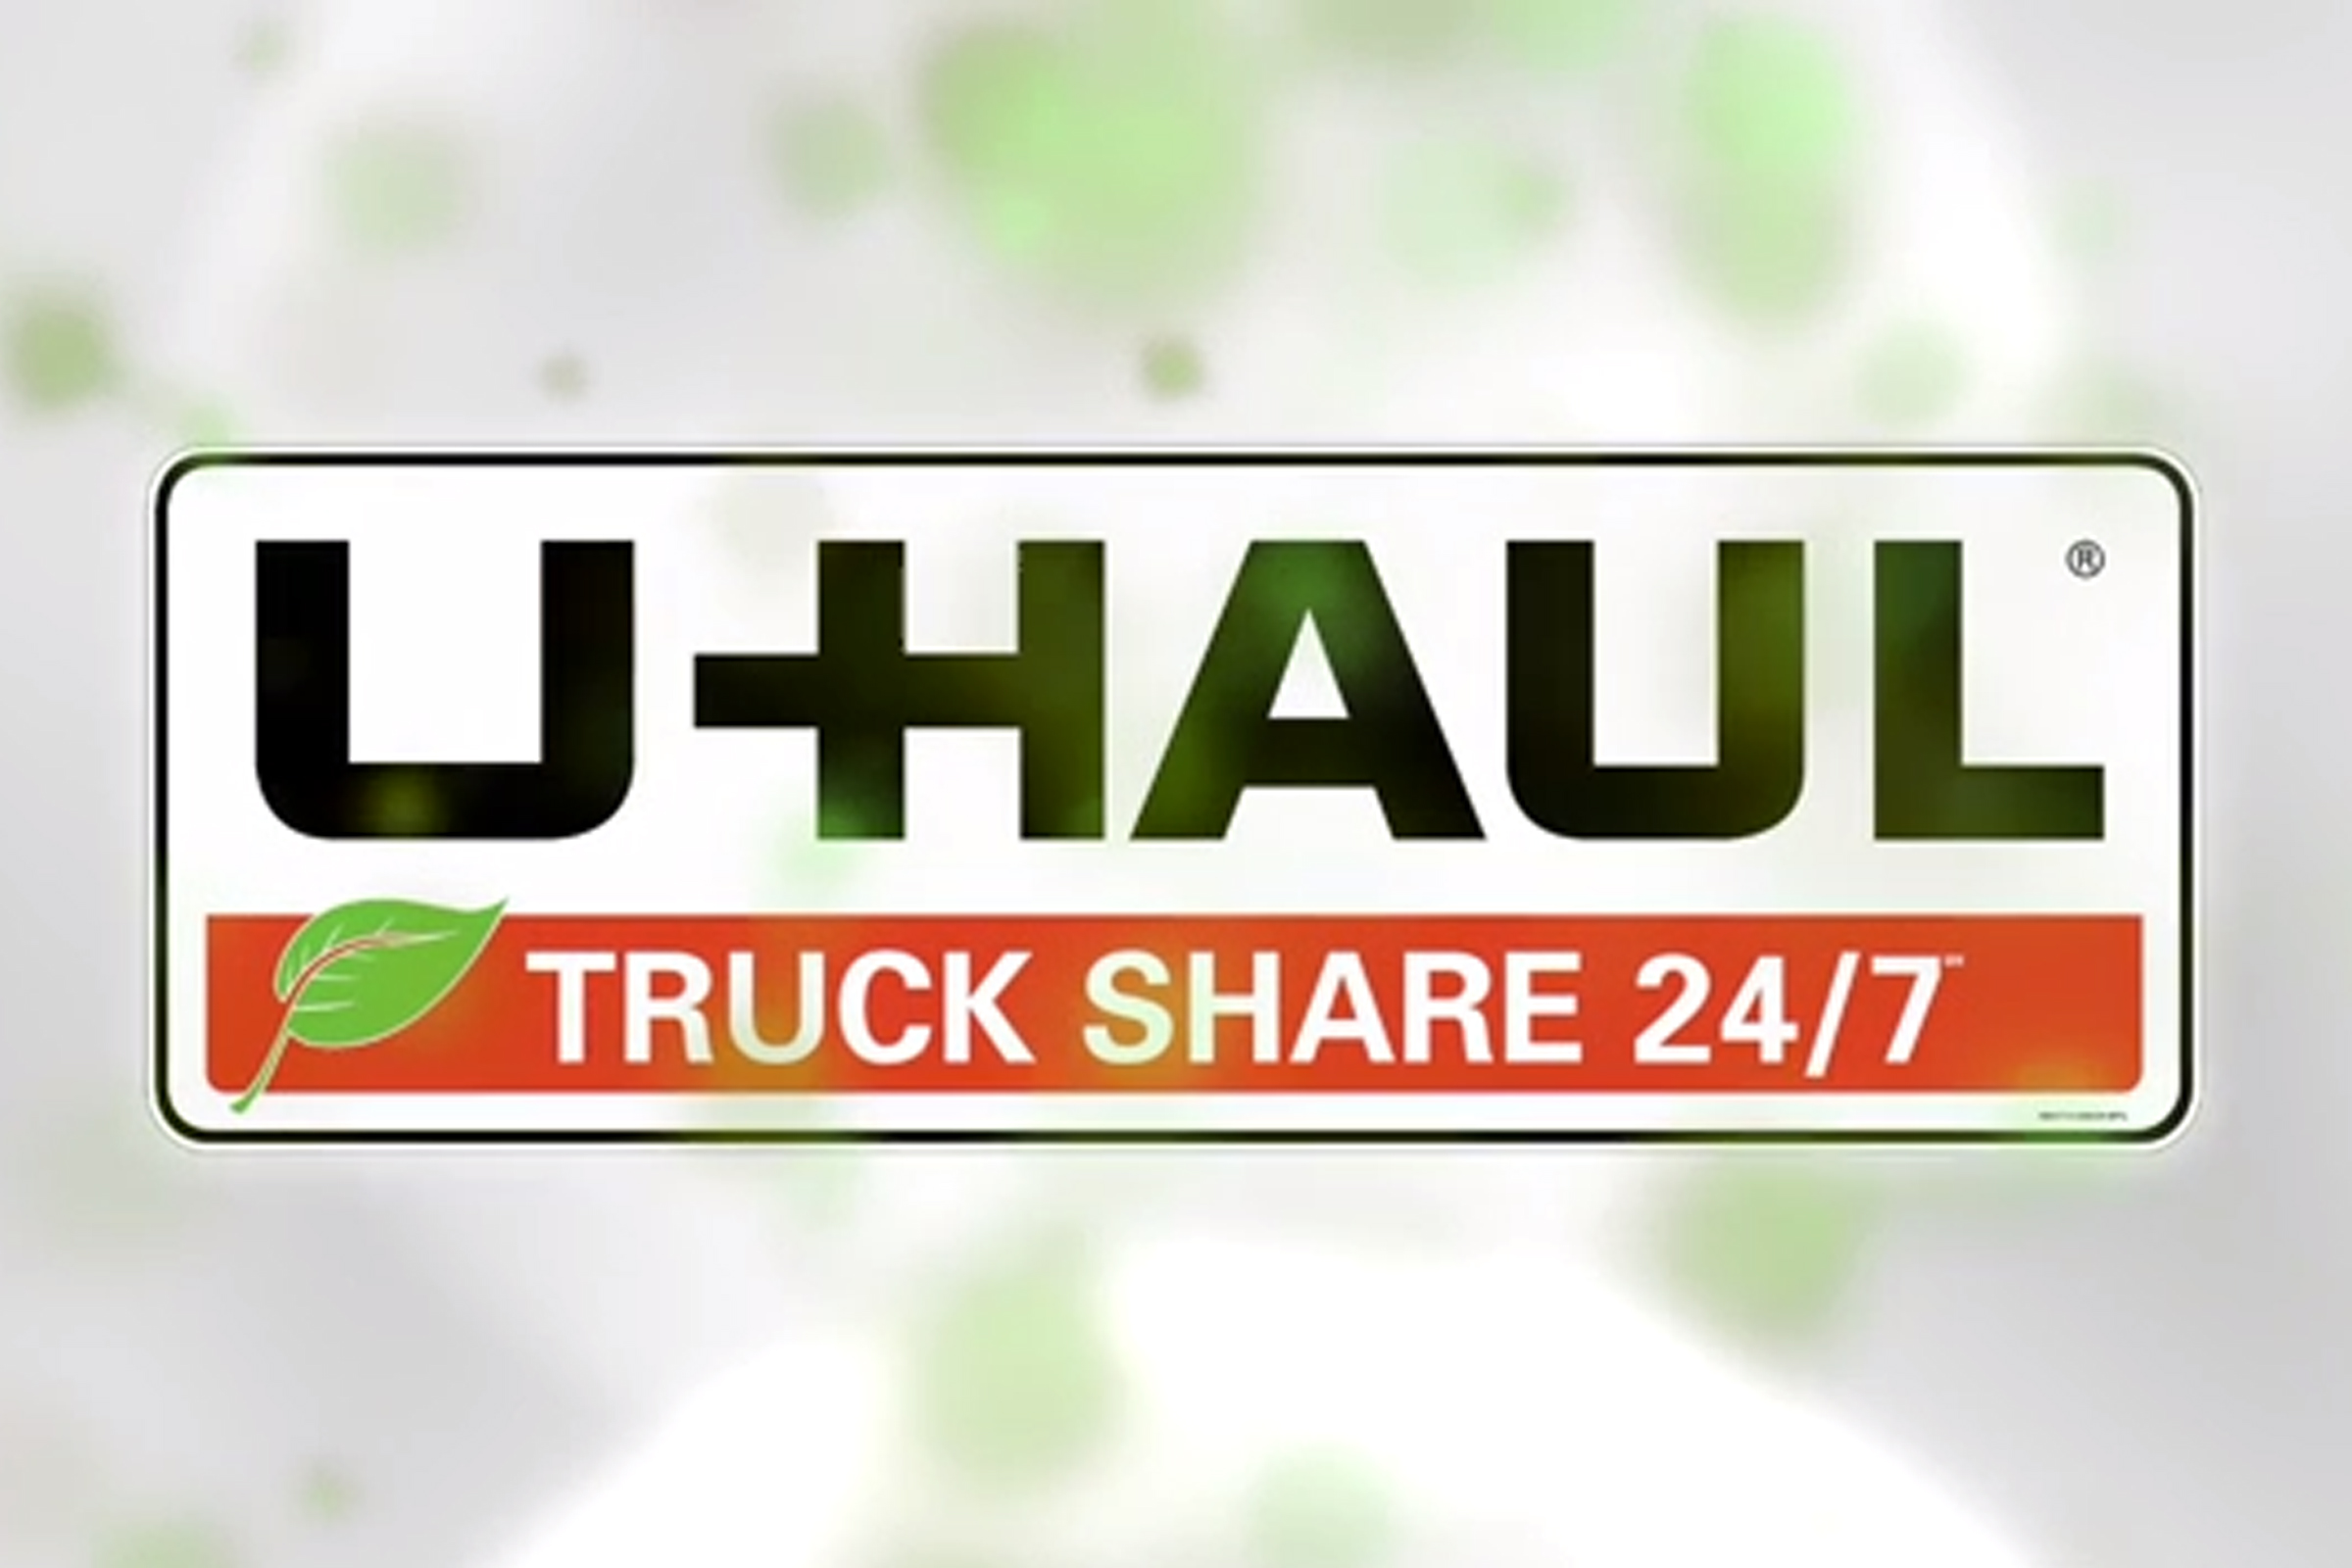 An easy step-by-step tutorial on how to reserve, pick up and return a U-Haul truck using only your smartphone.